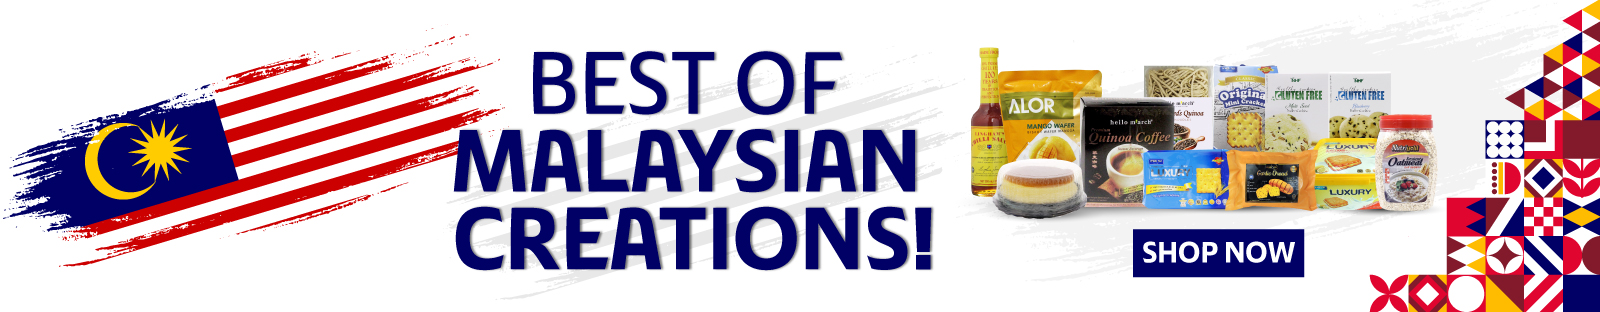 Best of Malaysian Creations-Web1